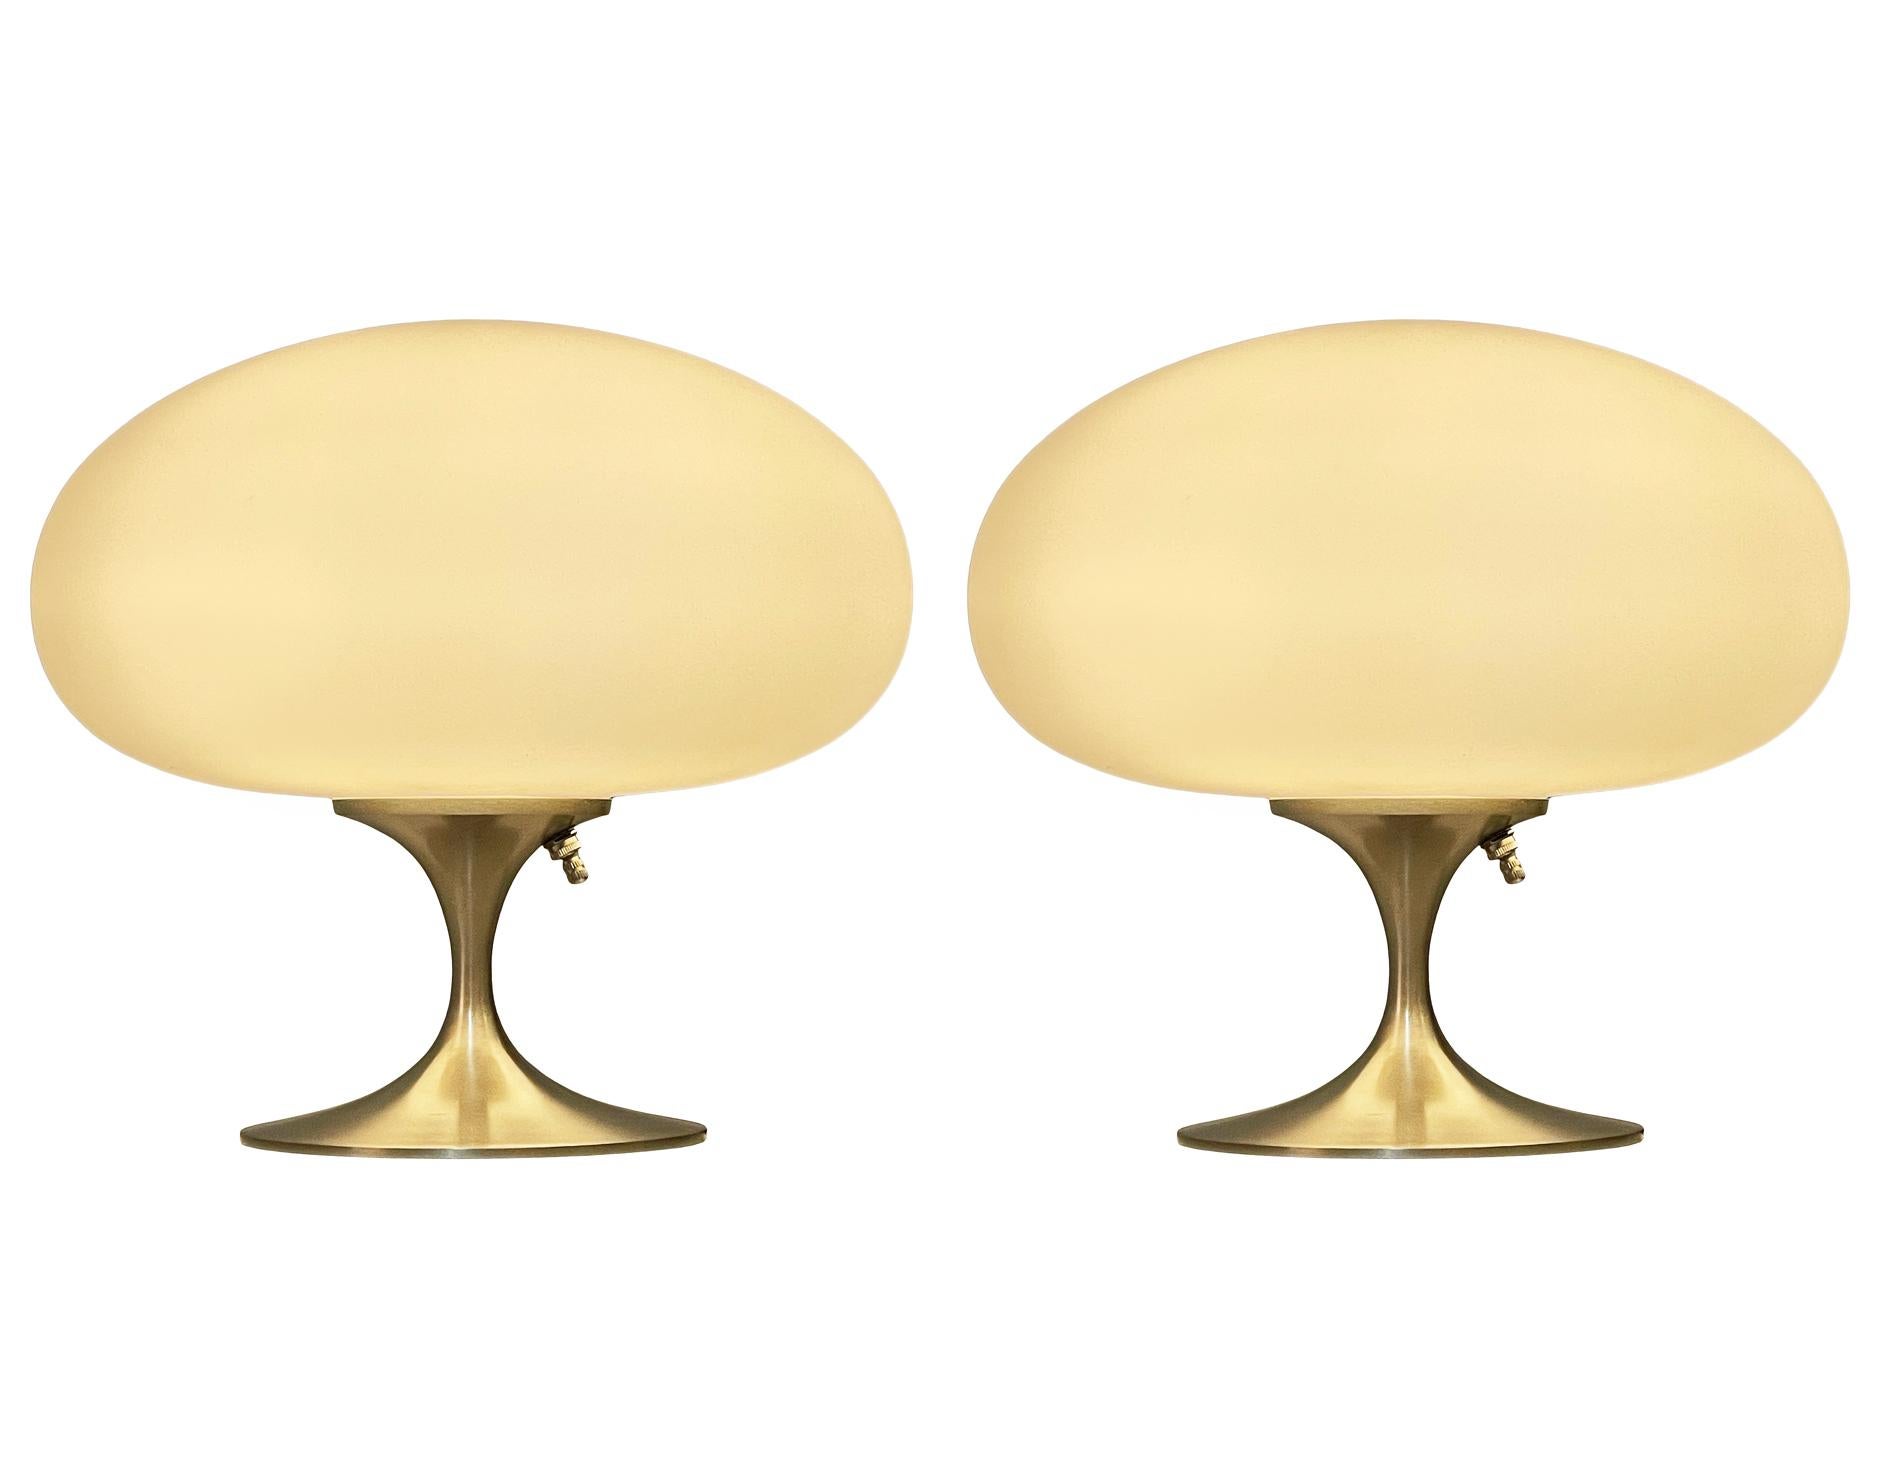 A gorgeous matching pair of tulip form table lamps after Laurel Lamp Company These feature nickel plated cast aluminum bases with mouth blown frosted white glass shades. The price includes the pair as shown.